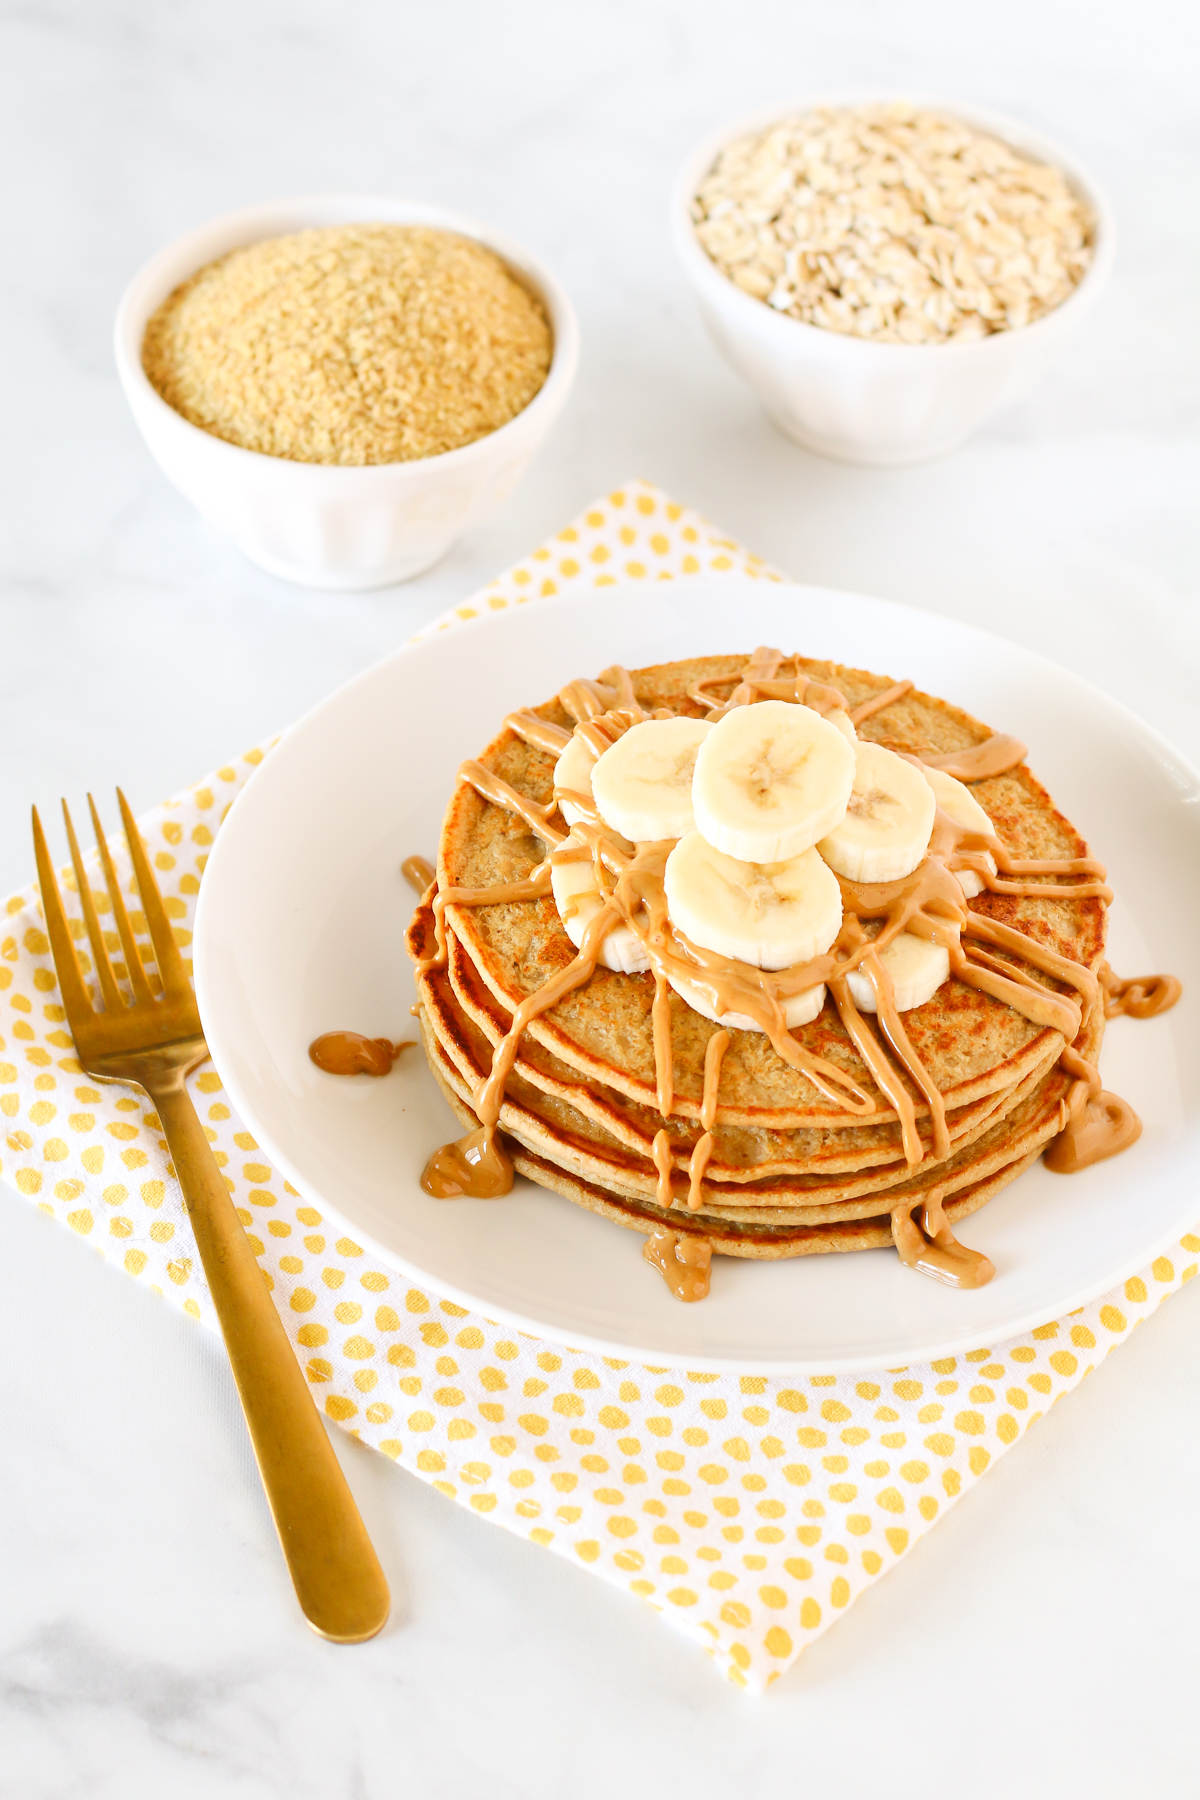 Gluten Free Vegan Blender Pancakes. A quick and easy pancake batter, made in the blender and ready in minutes. Great for those busy mornings!